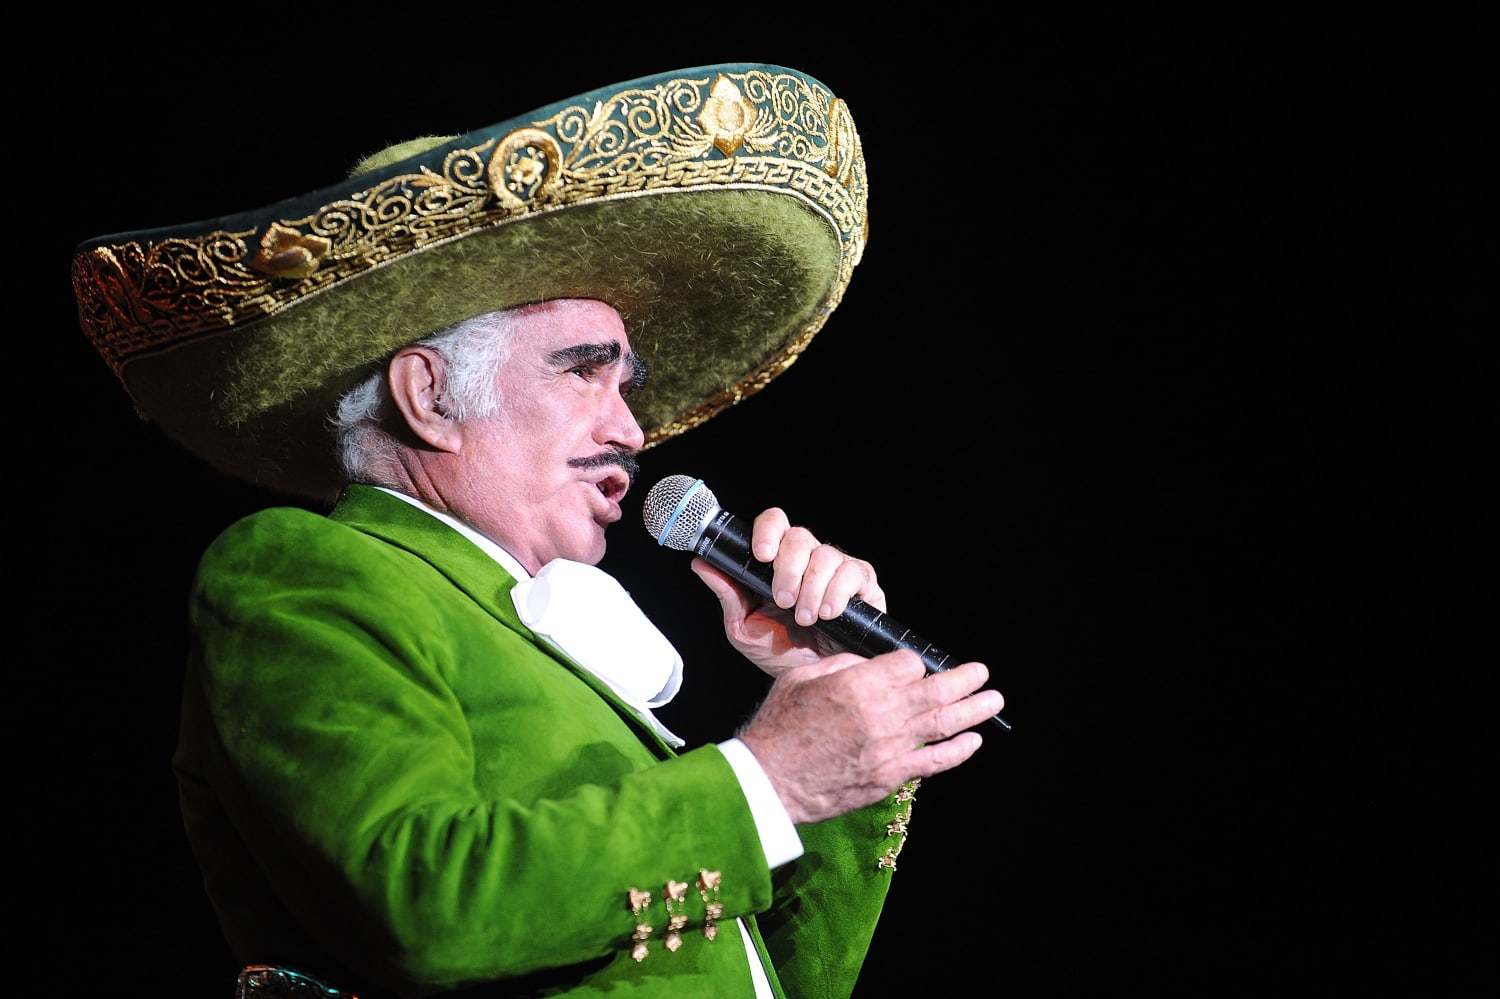 Vicente Fernández, Mexico’s national treasure, has died